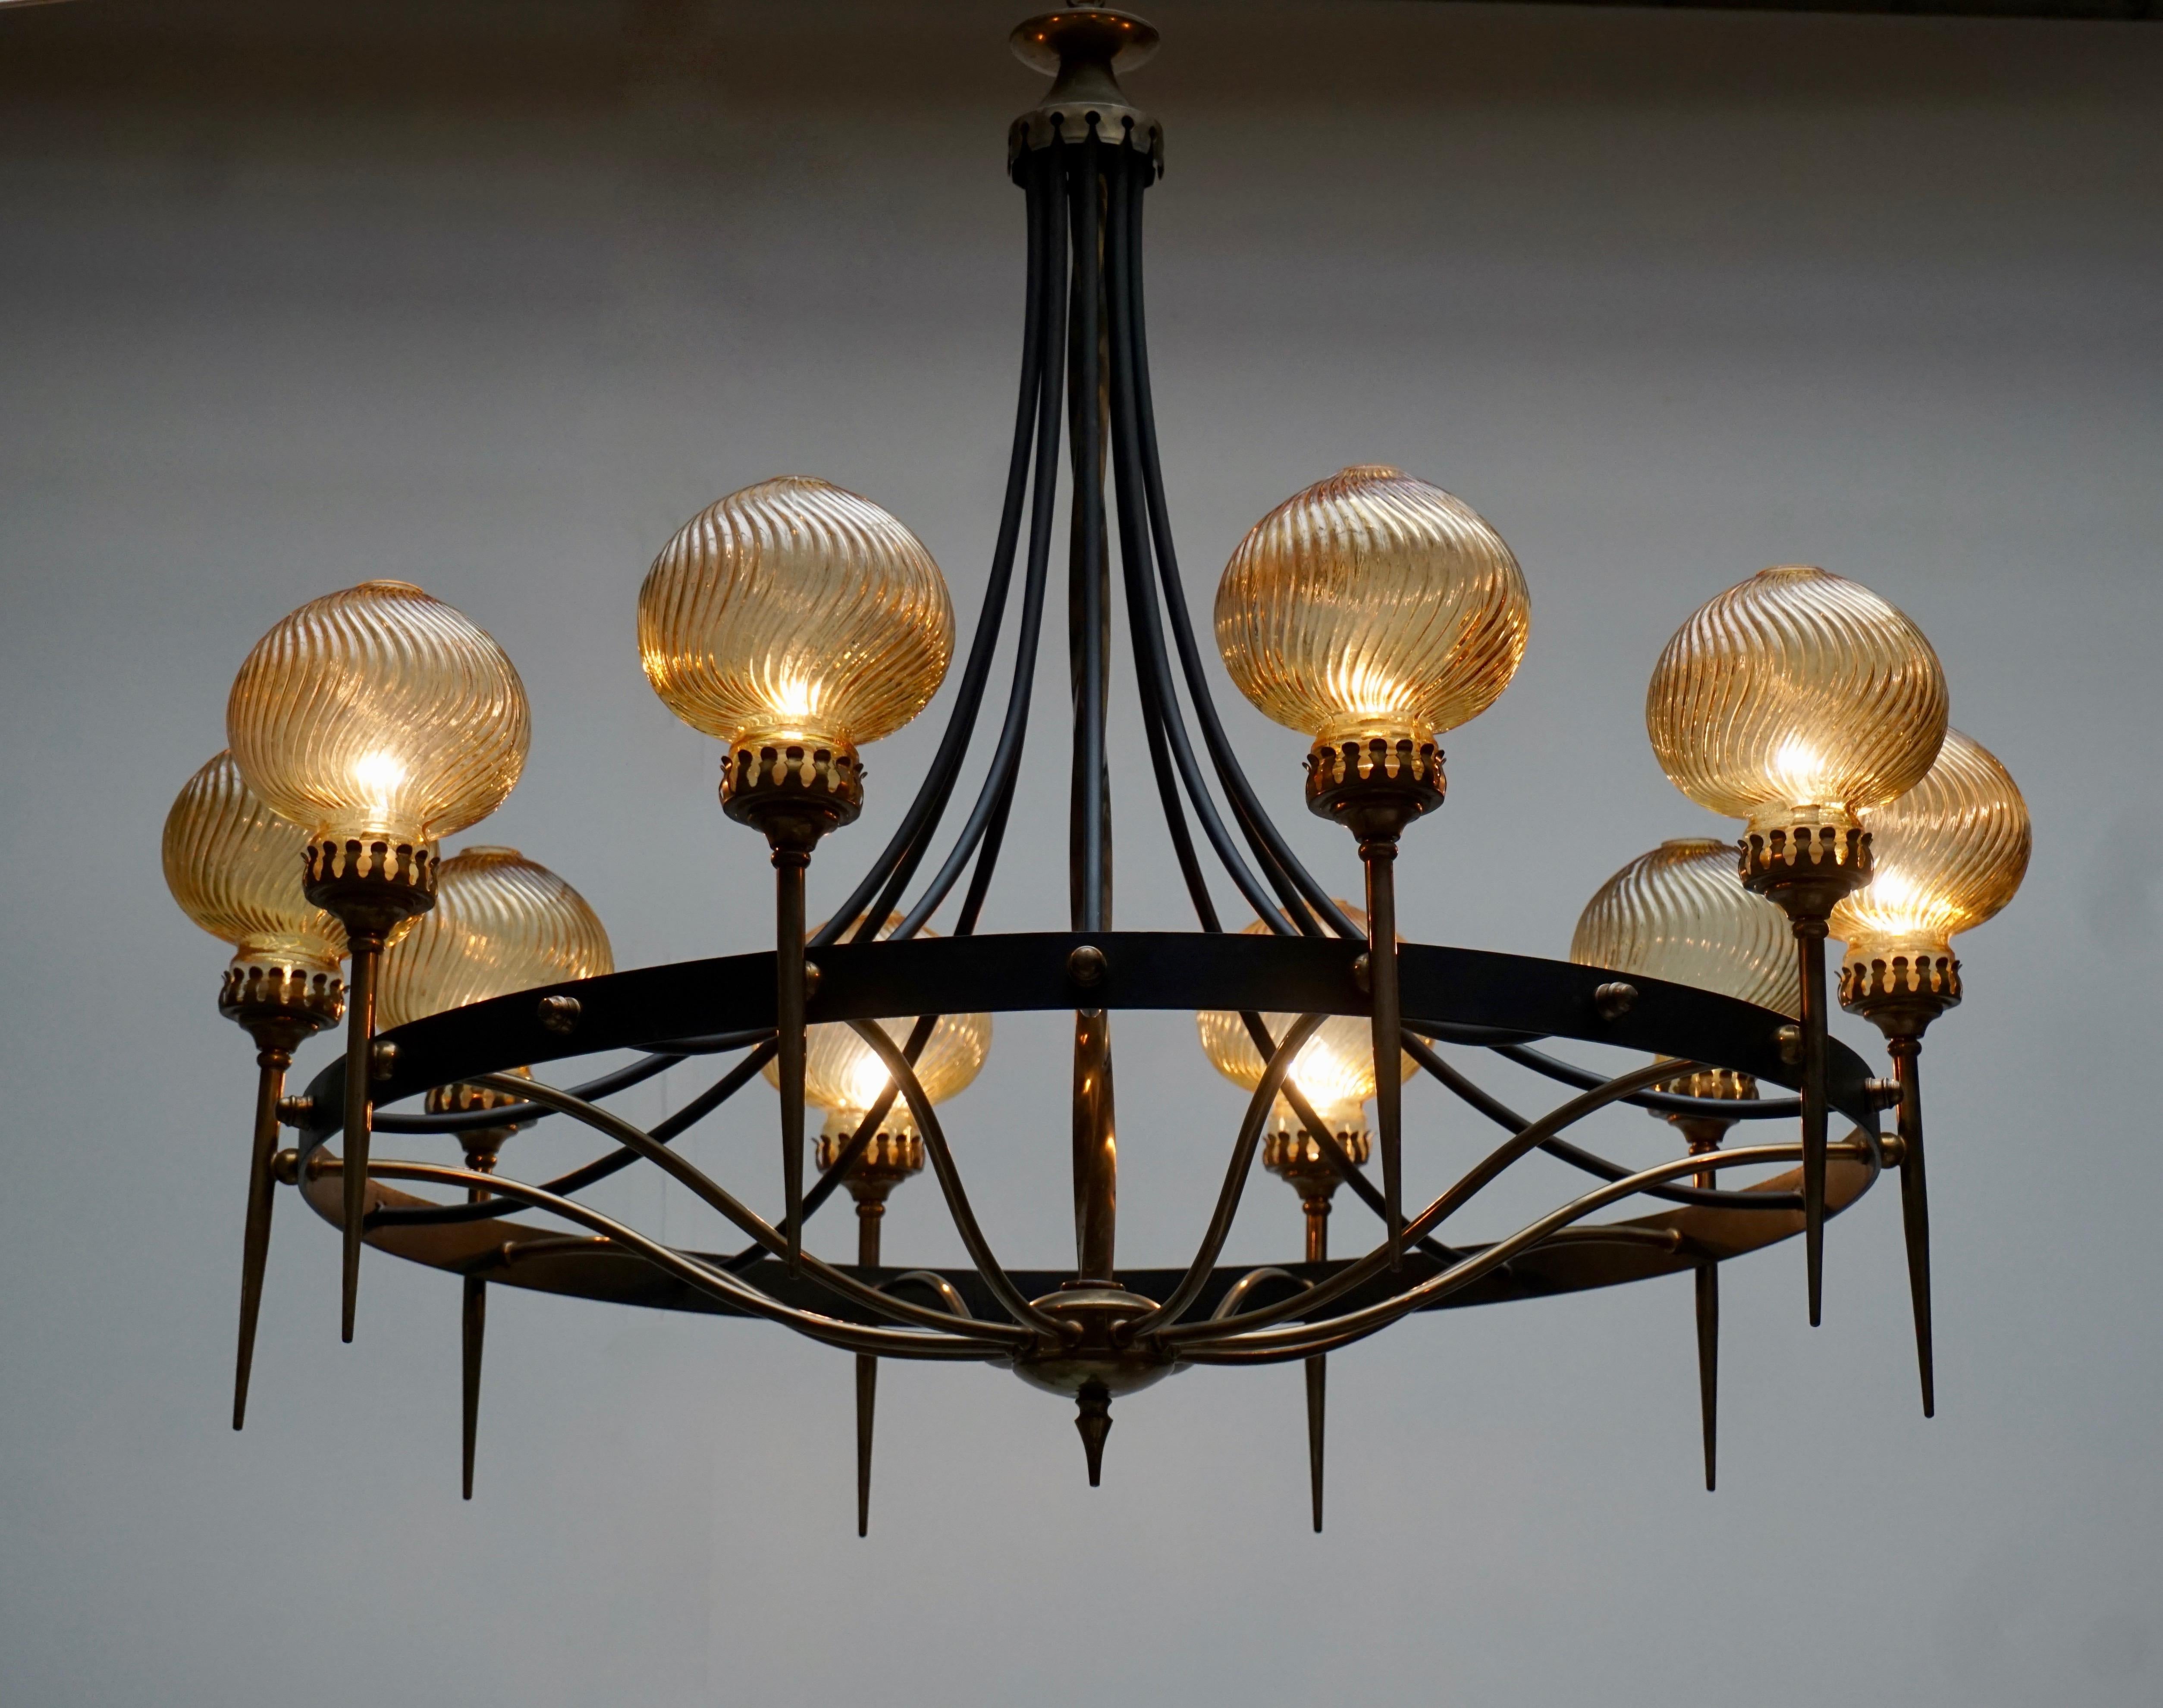 Large Italian chandelier in brass and metal with brown Murano glass coupes.
Measures: Diameter 98 cm.
Height fixture 80 cm.
Total height with the chain is 180 cm.
Ten E14 bulbs.
The photo with the white glass coupes is not for sale.